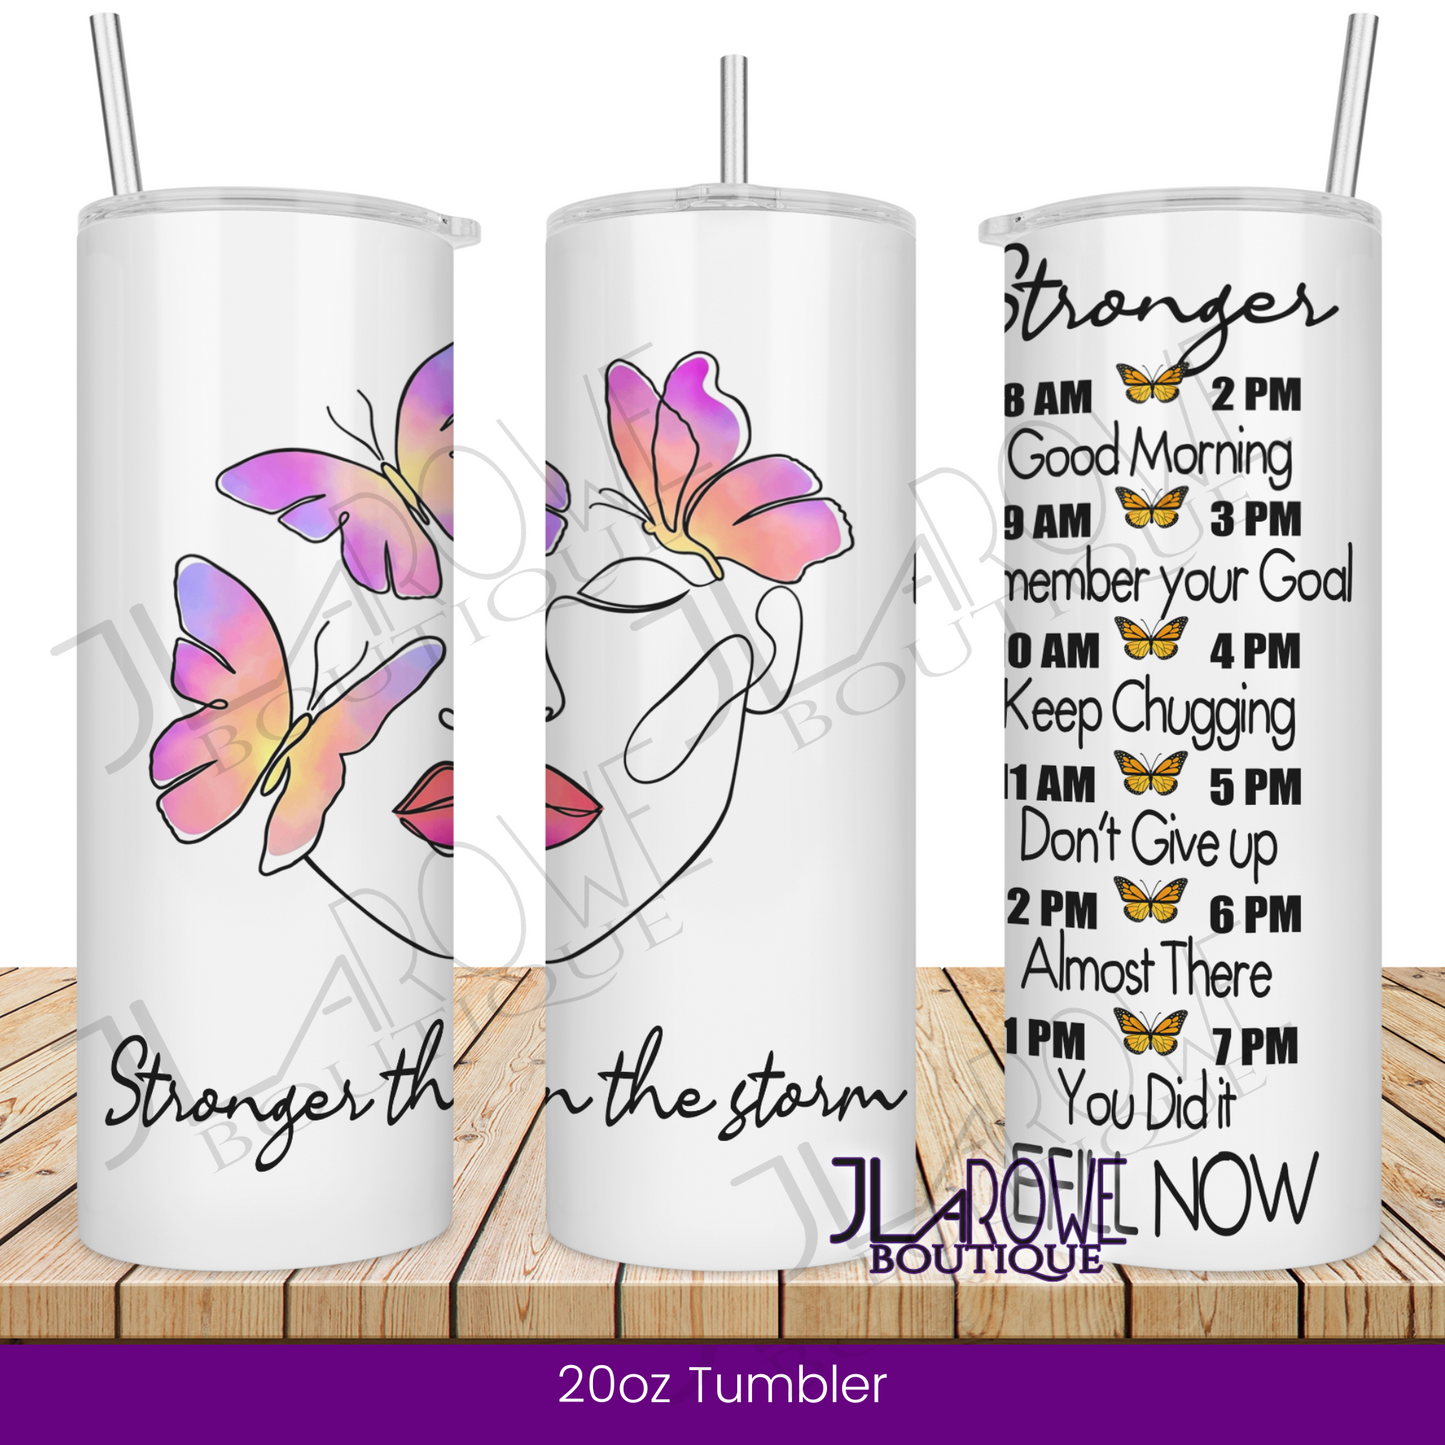 Motivational Butterly, Sophisticated, Girly, Strong, Remember God, Refill Now - 20oz Tumbler